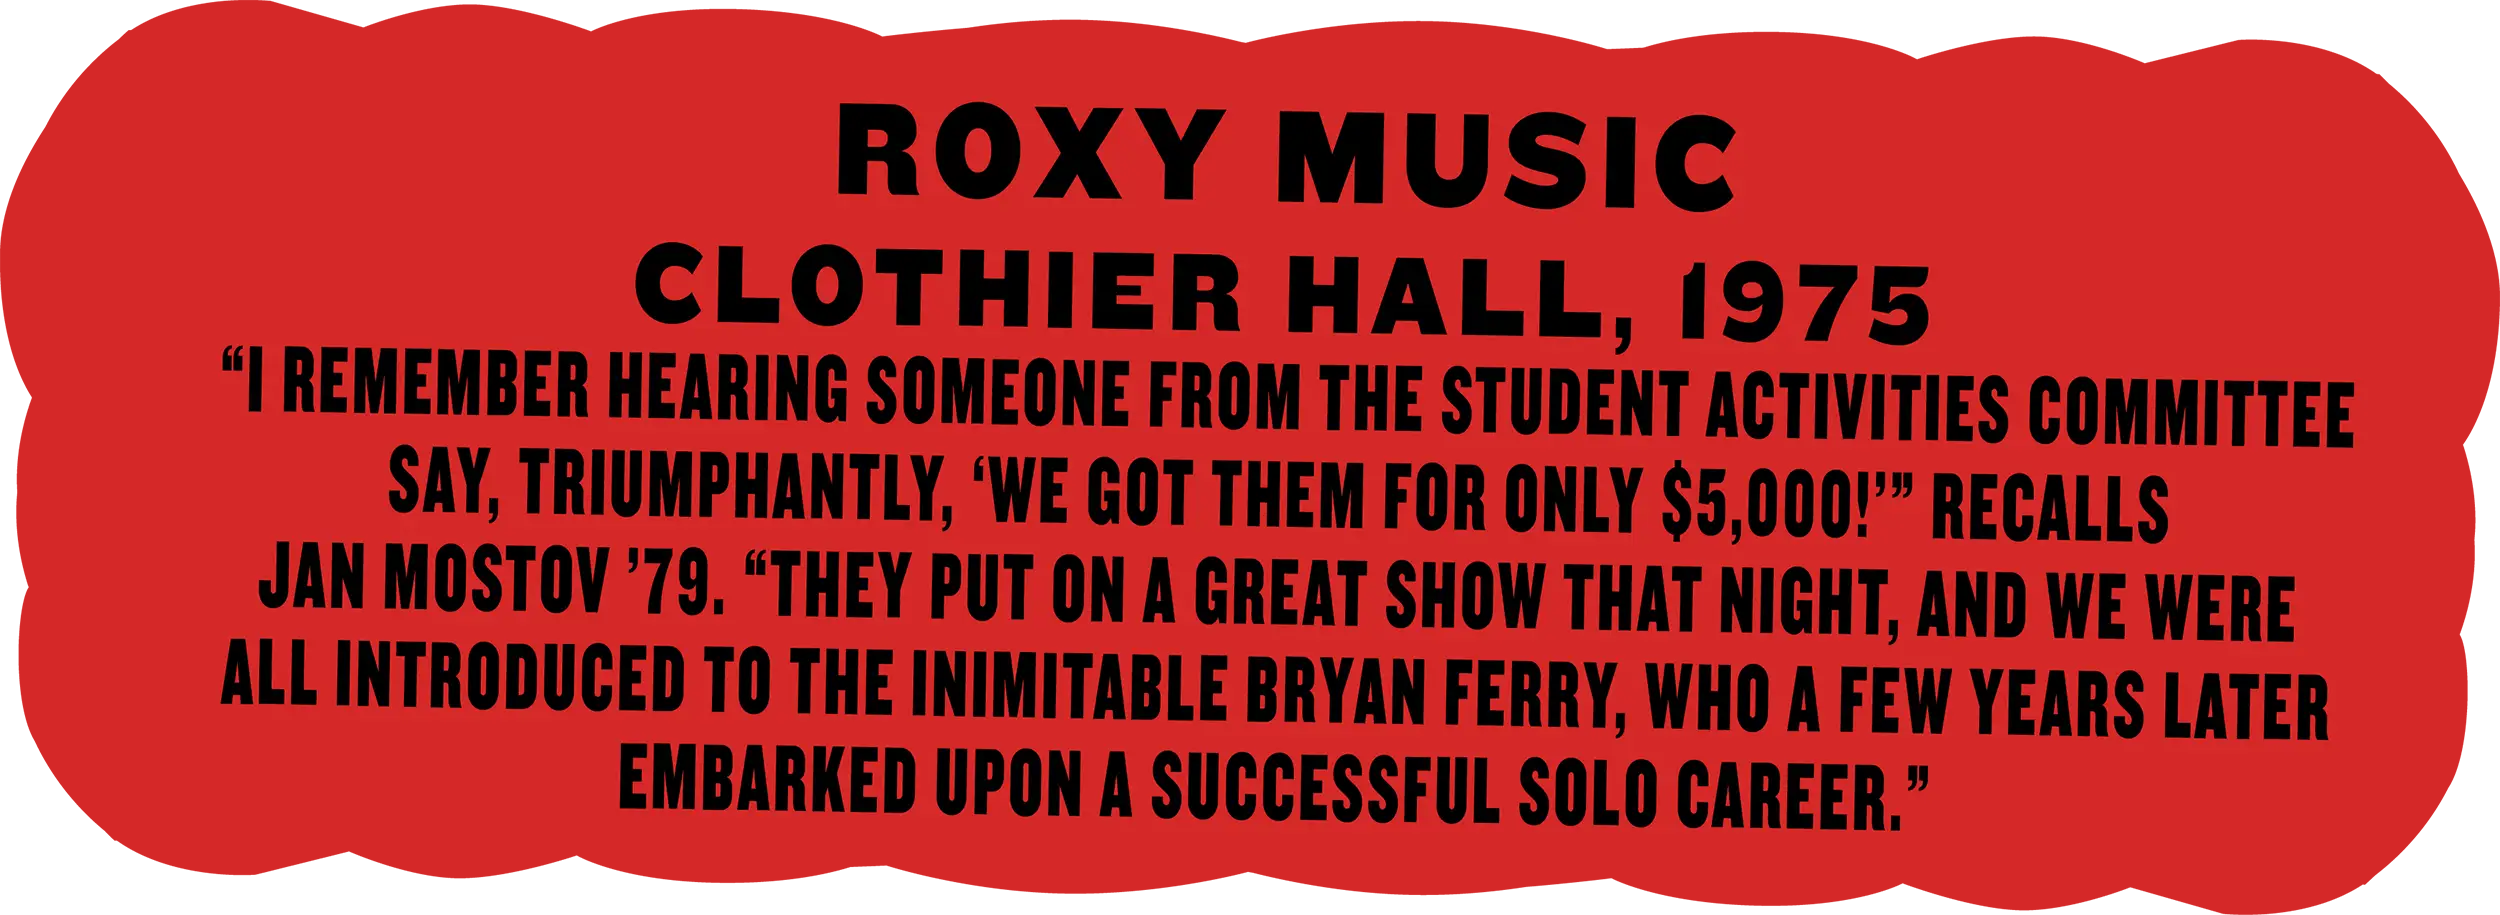 Roxy Music, Clothier Hall, 1975; “I remember hearing someone from the student activities committee say, triumphantly, ‘We got them for only $5,000!’” recalls Jan Mostov ’79. “They put on a great show that night, and we were all introduced to the inimitable Bryan Ferry, who a few years later embarked upon a successful solo career.”